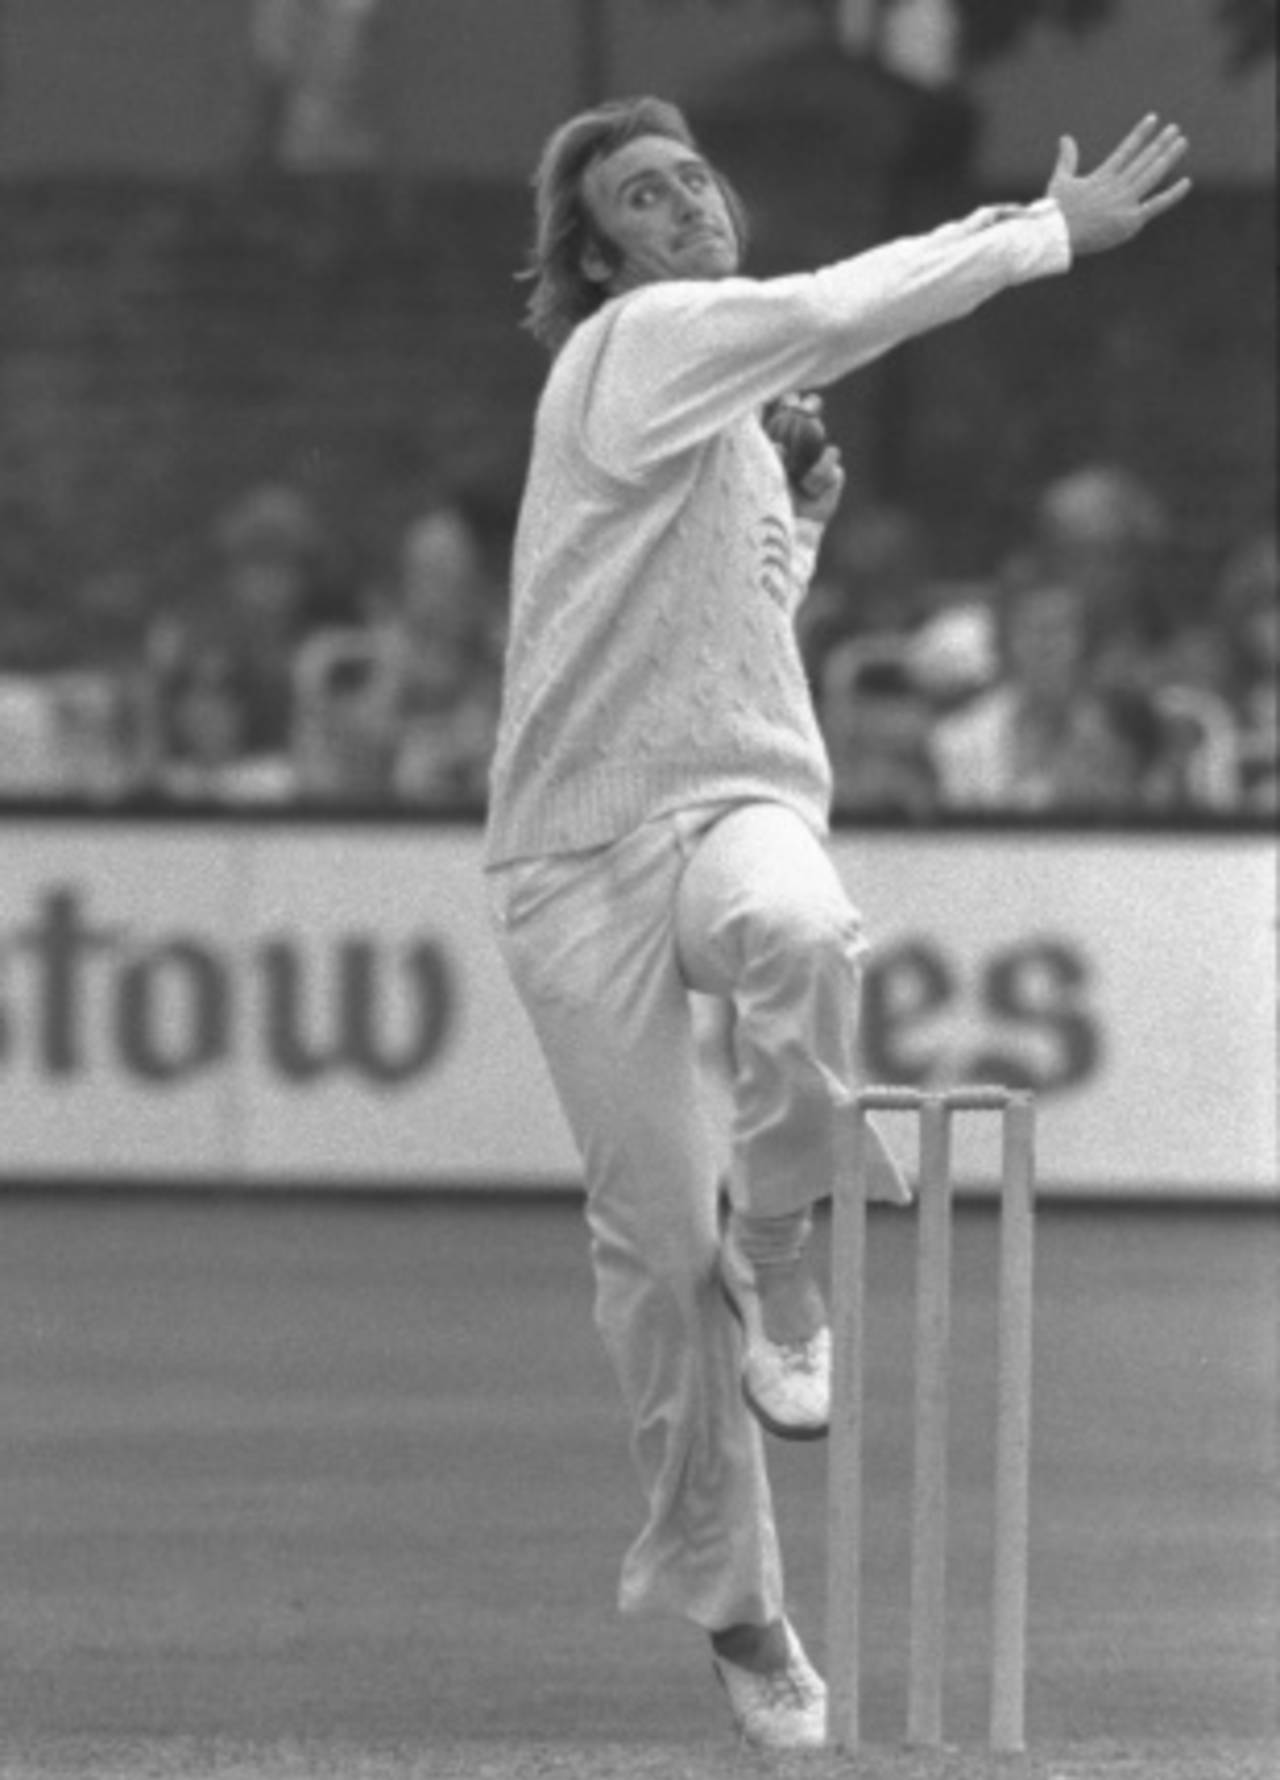 John Lever bowling at Lord's, 1979